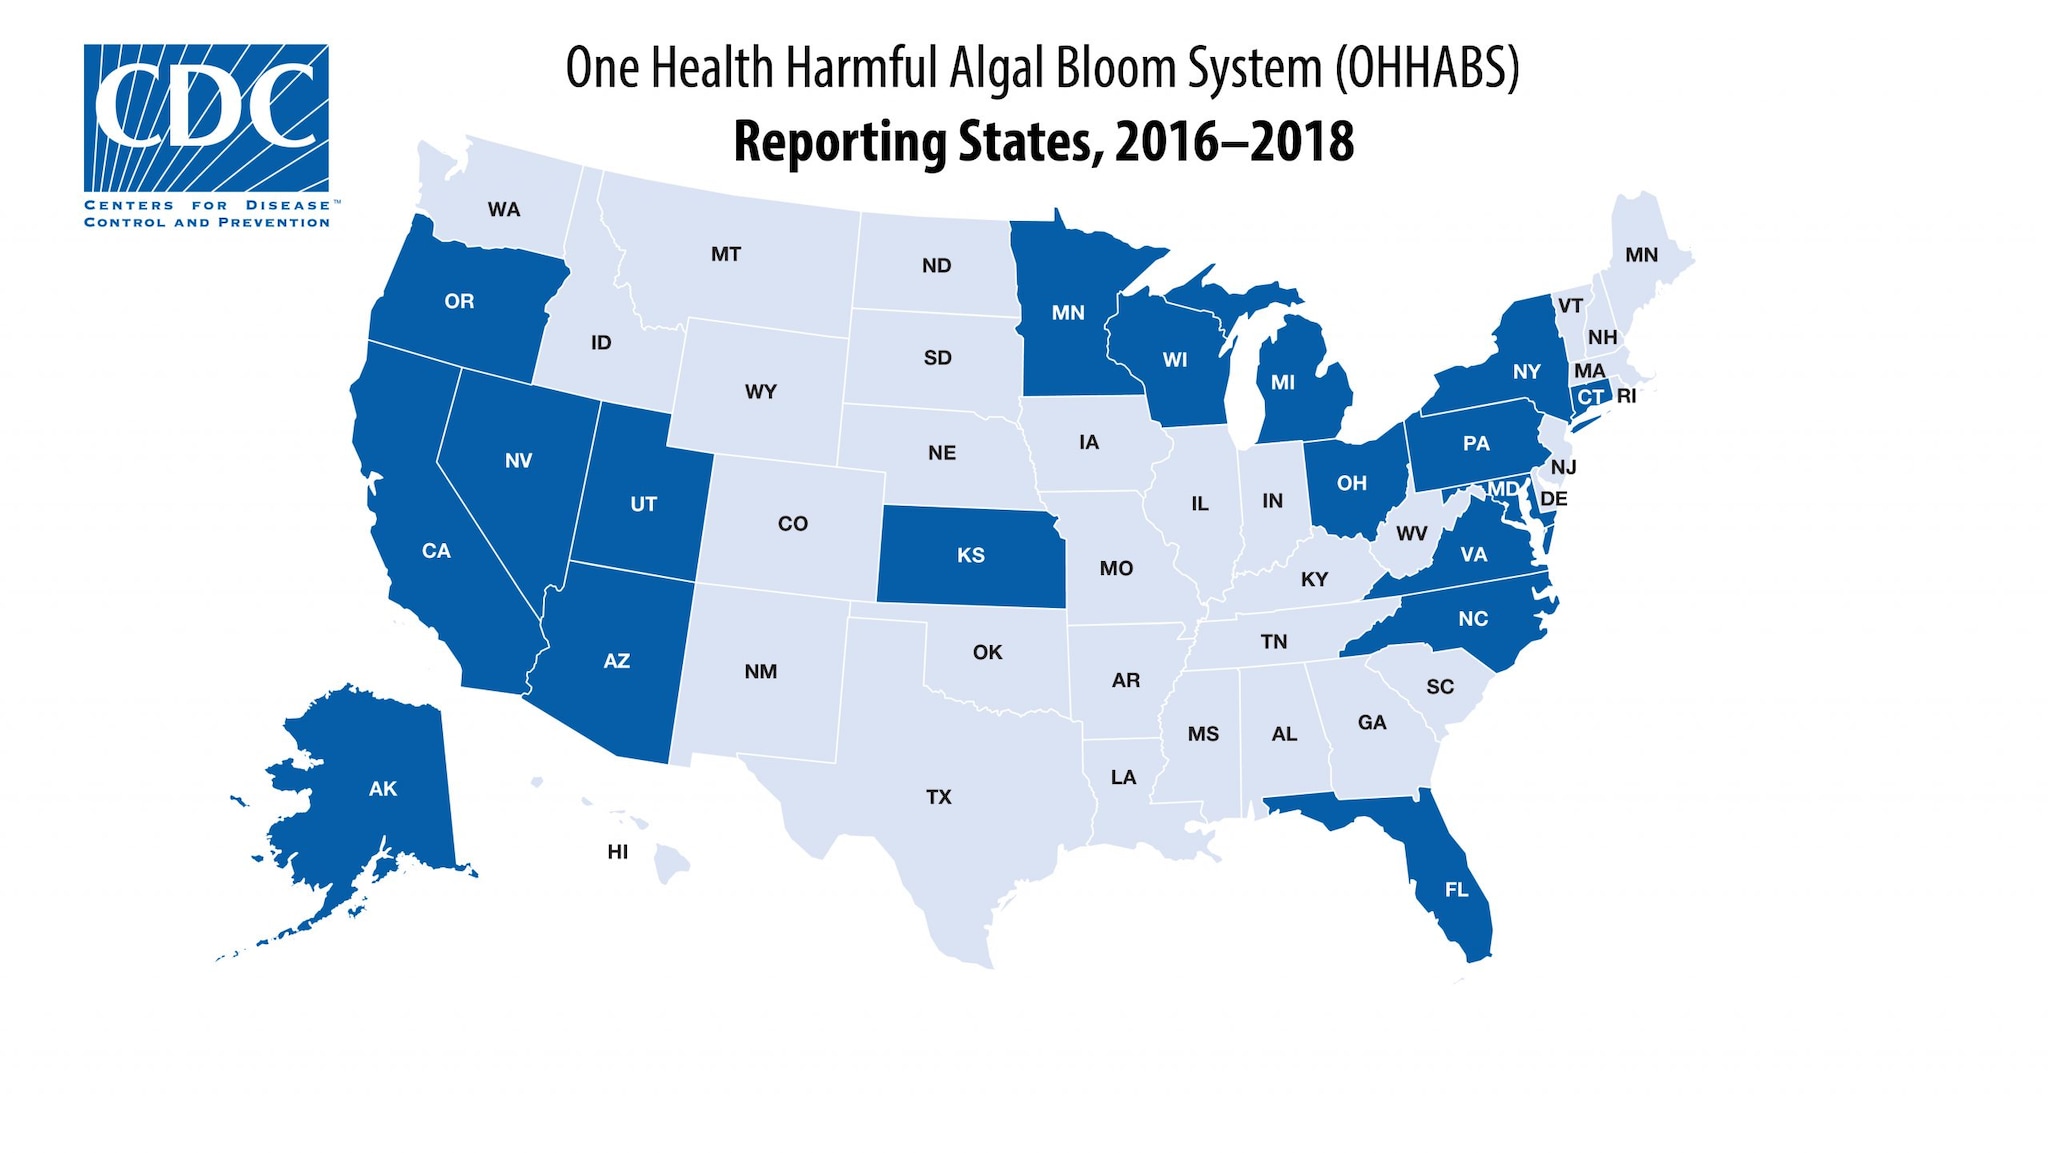 States reporting HAB events, 2016-2018